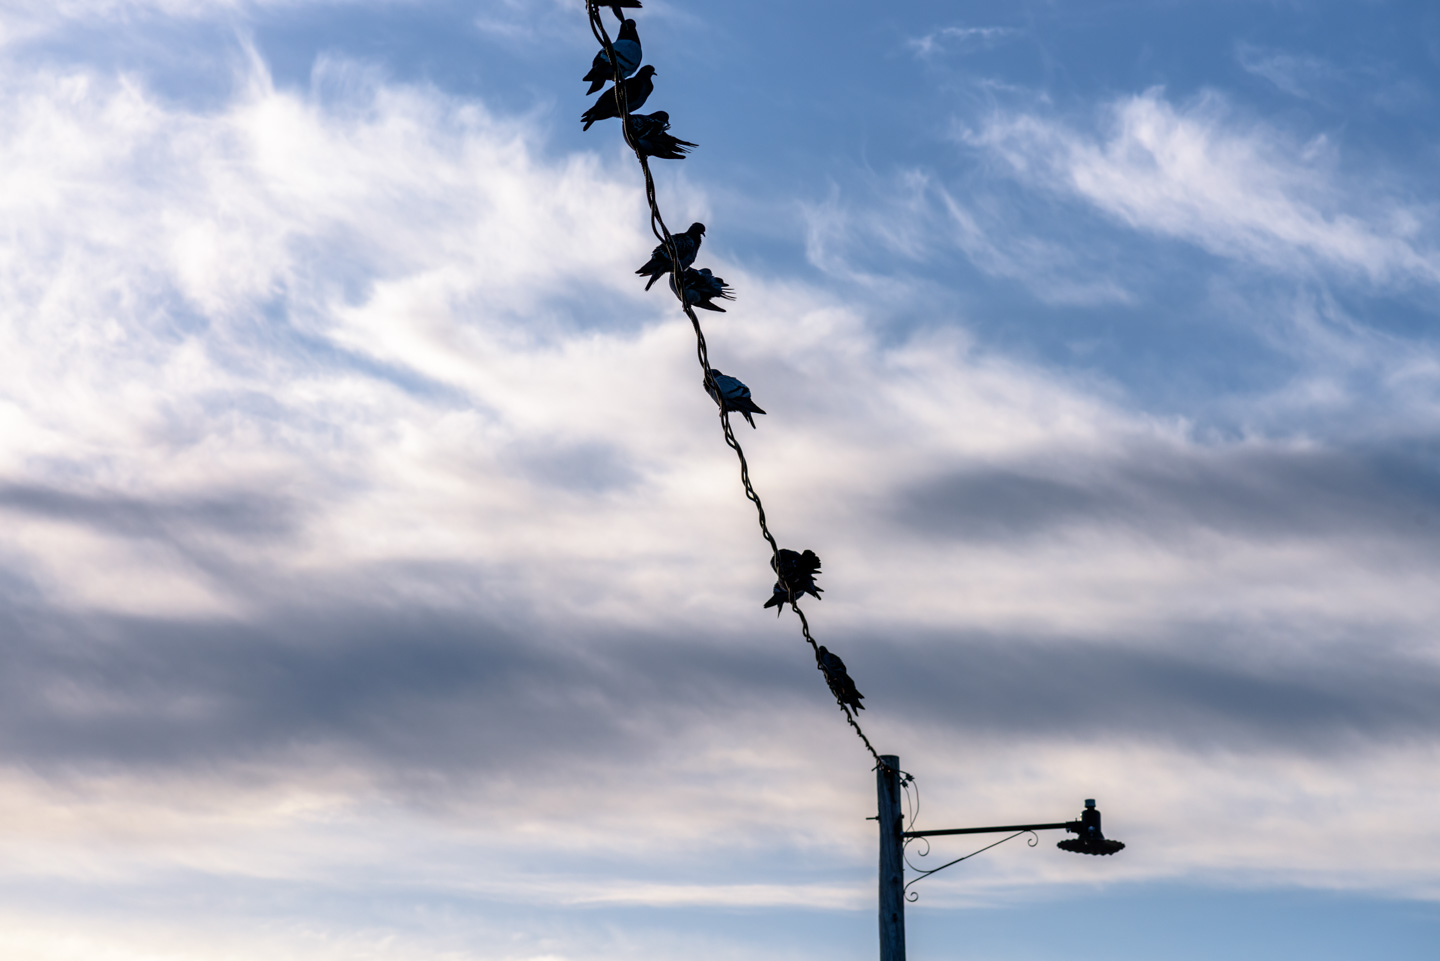 pigeons on a power line